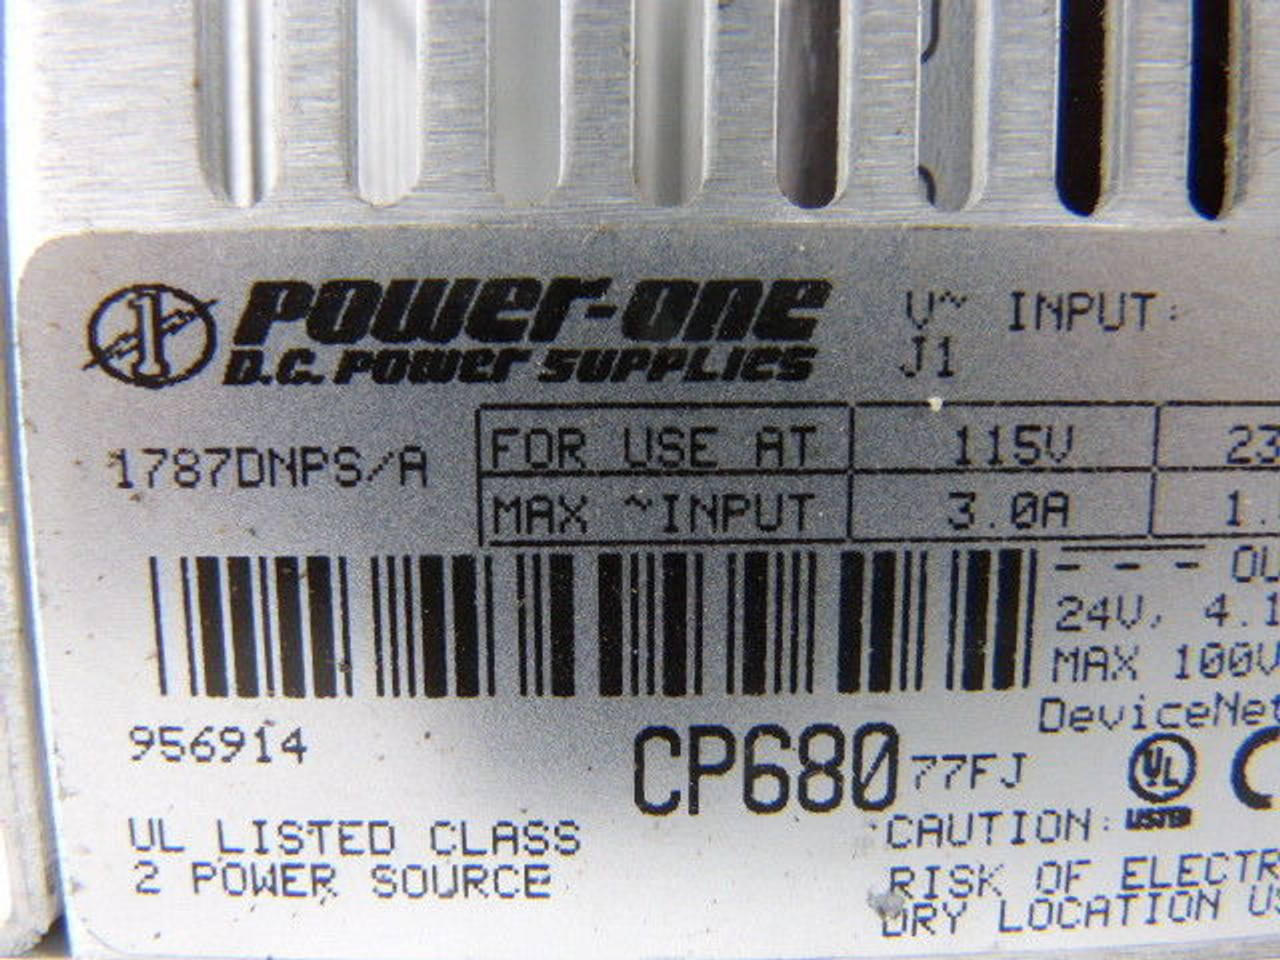 PowerOne CP680-1787DNPS DeviceNet Class II Power Supply 4.1A 24VDC USED